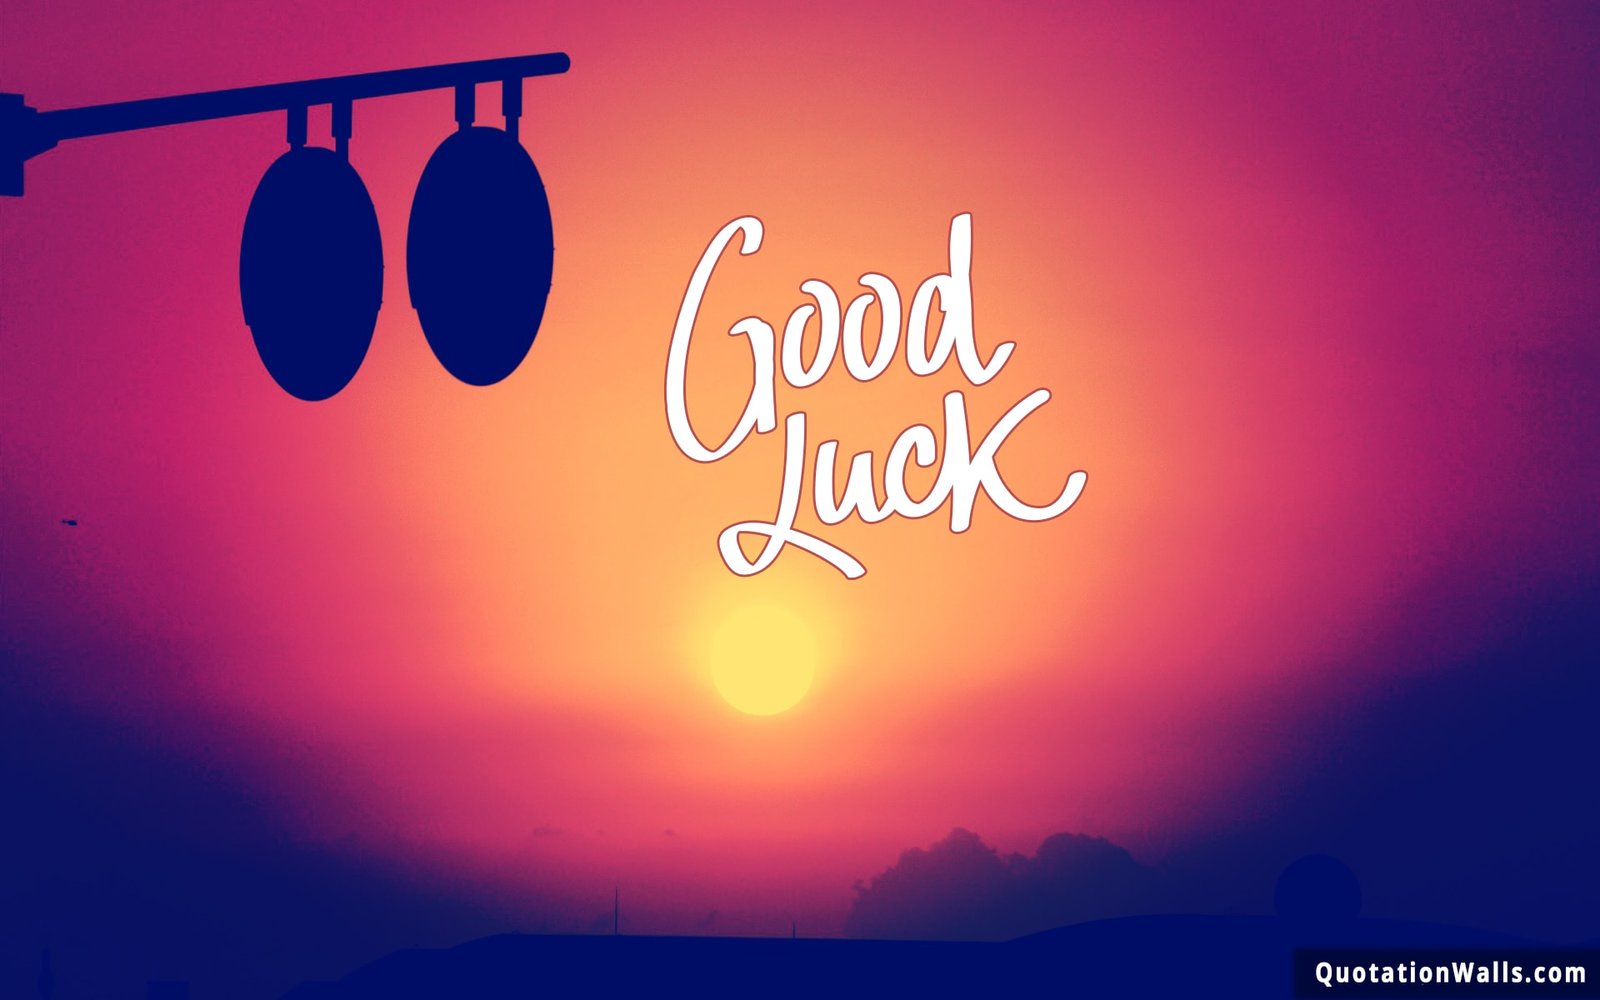 Good Luck Life Wallpaper for Mobile - QuotationWalls